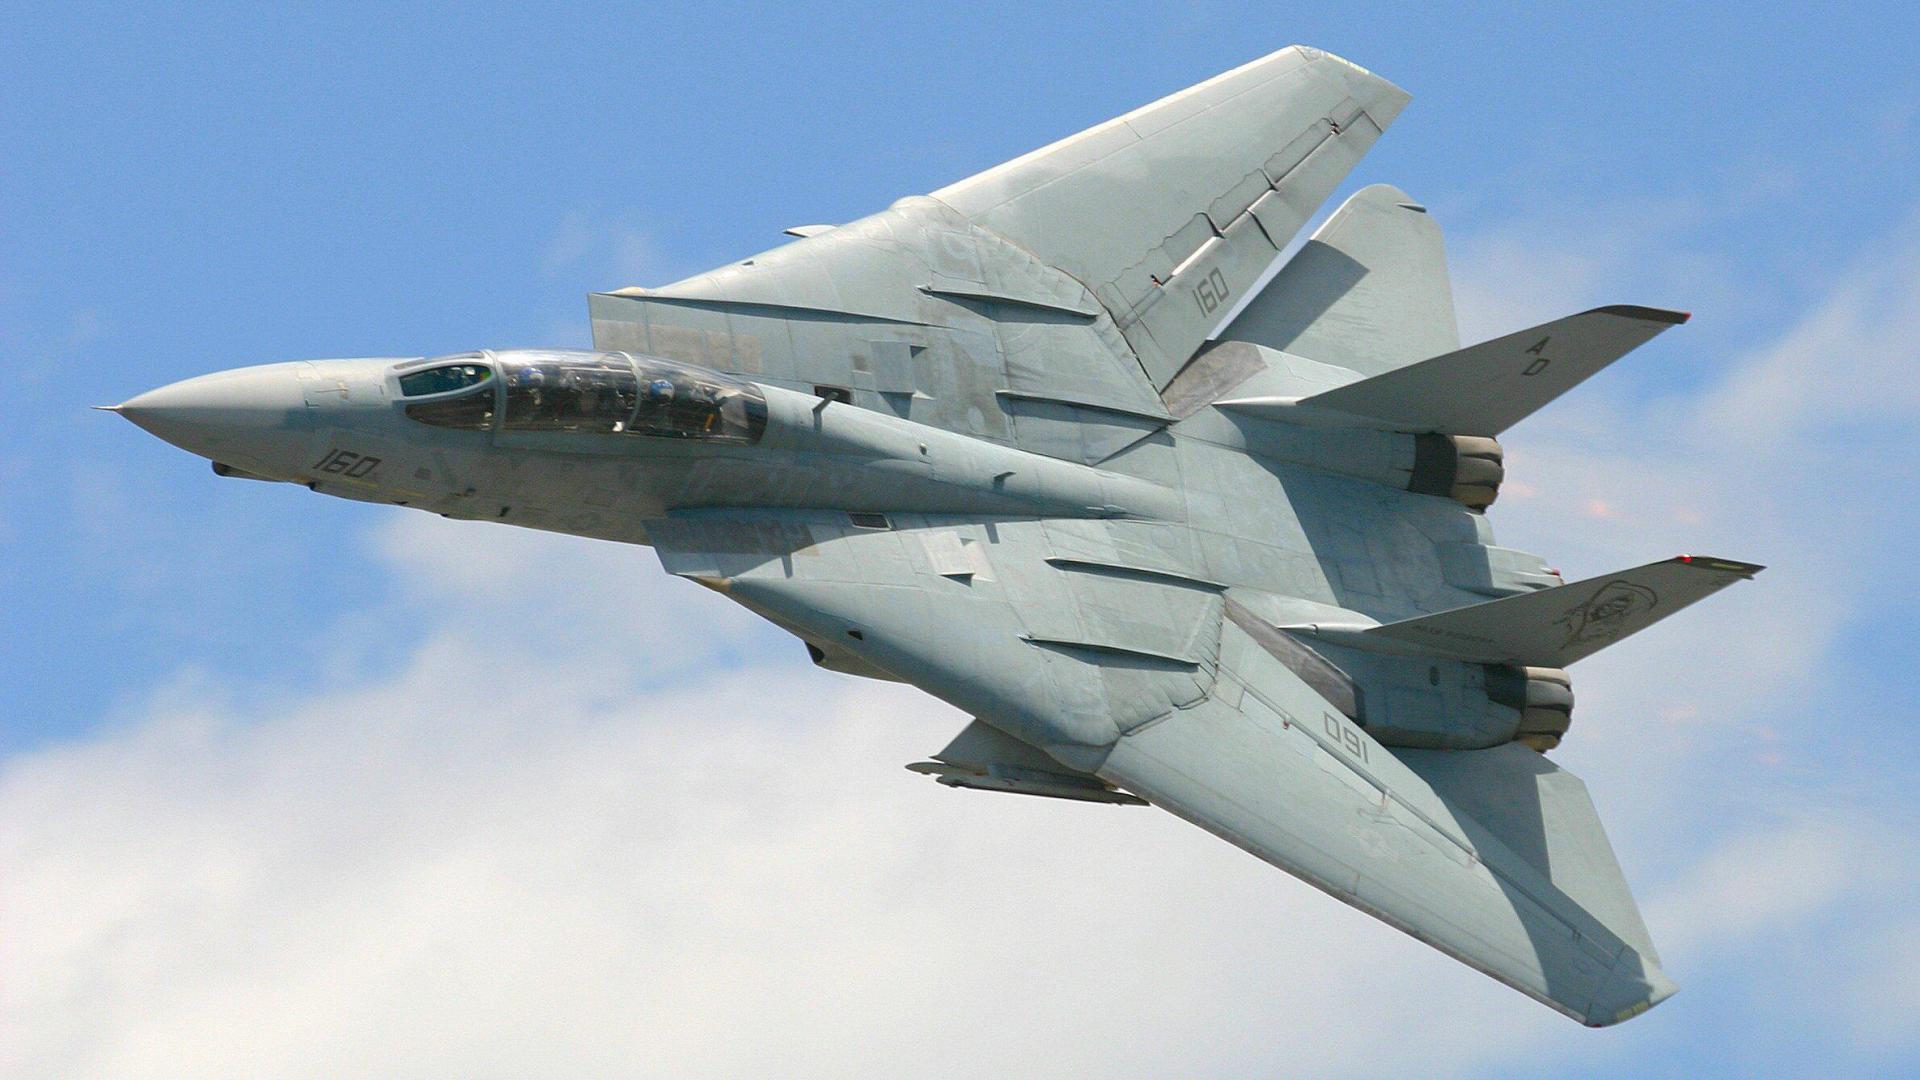 The f14 tomcat   91303   High Quality and Resolution Wallpapers on